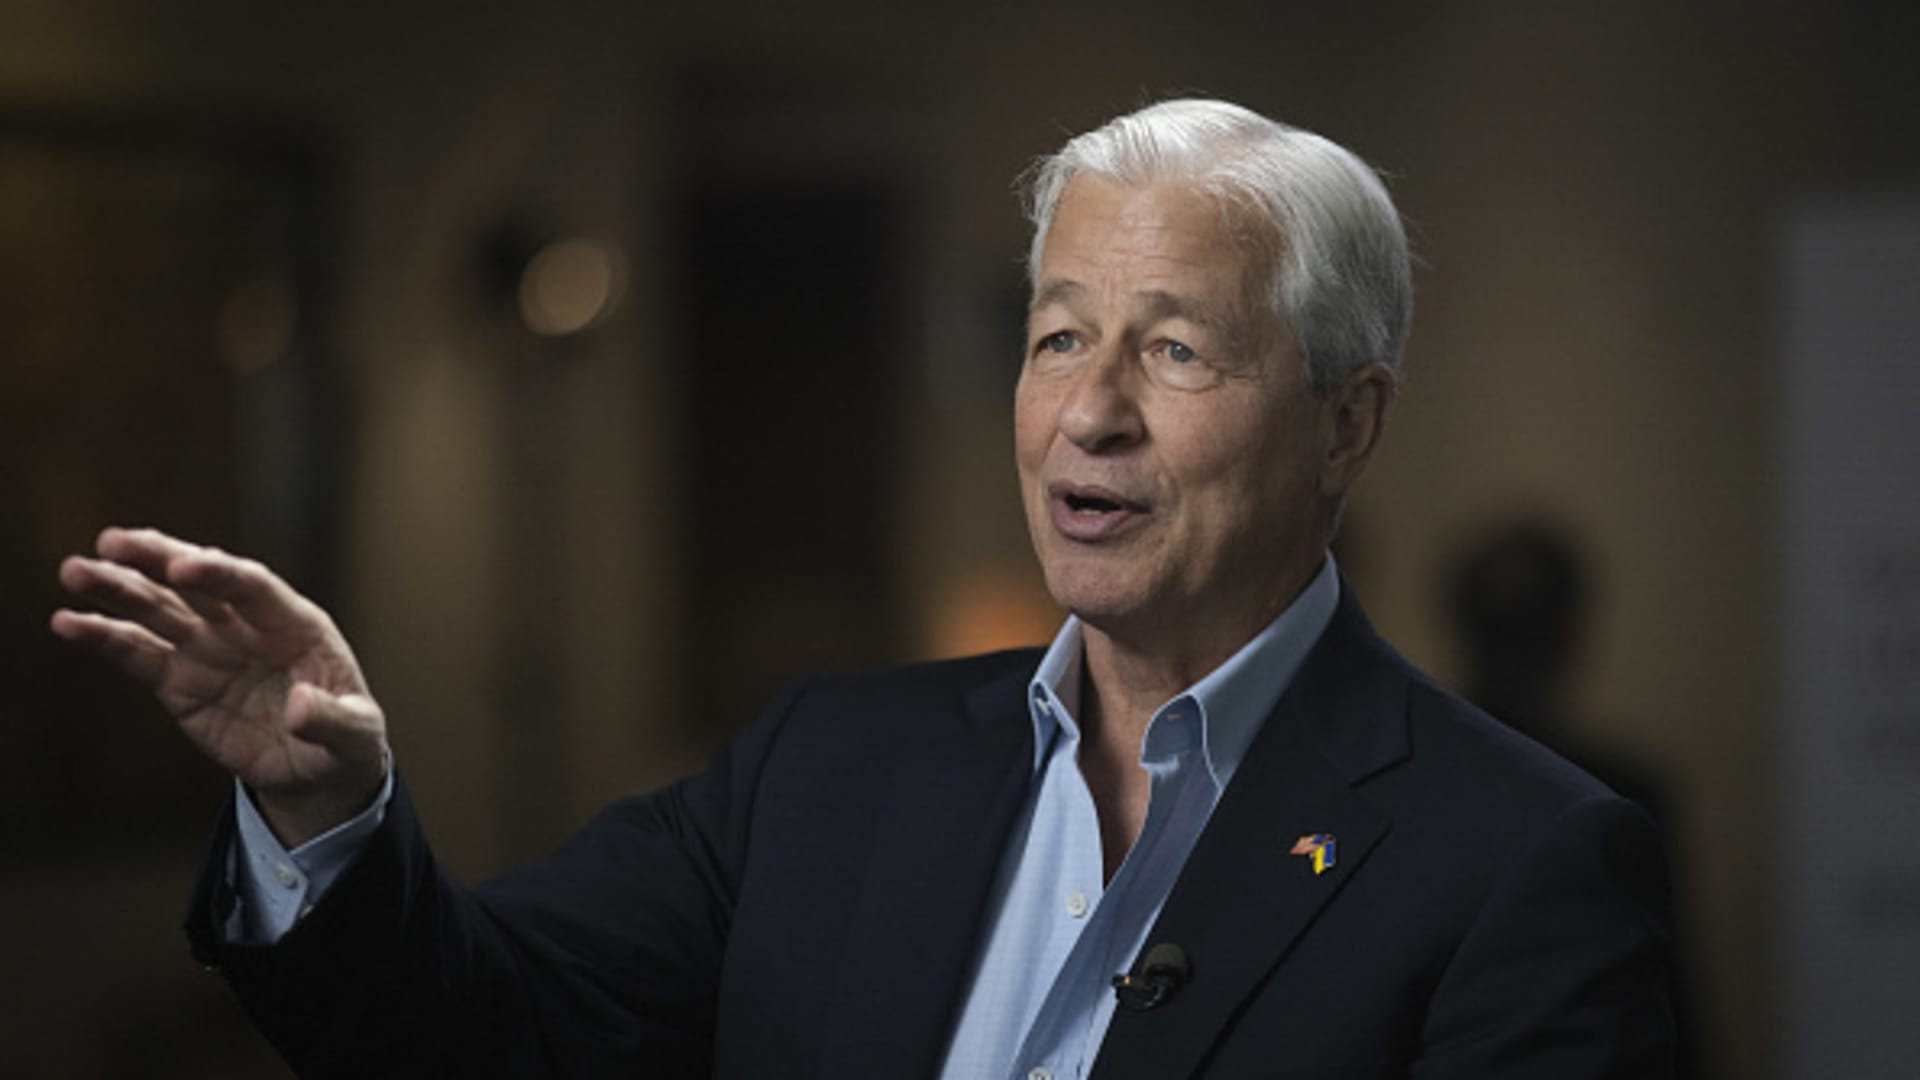 Jamie Dimon: ‘This part of the crisis is over’ after JPMorgan Chase acquires First Republic